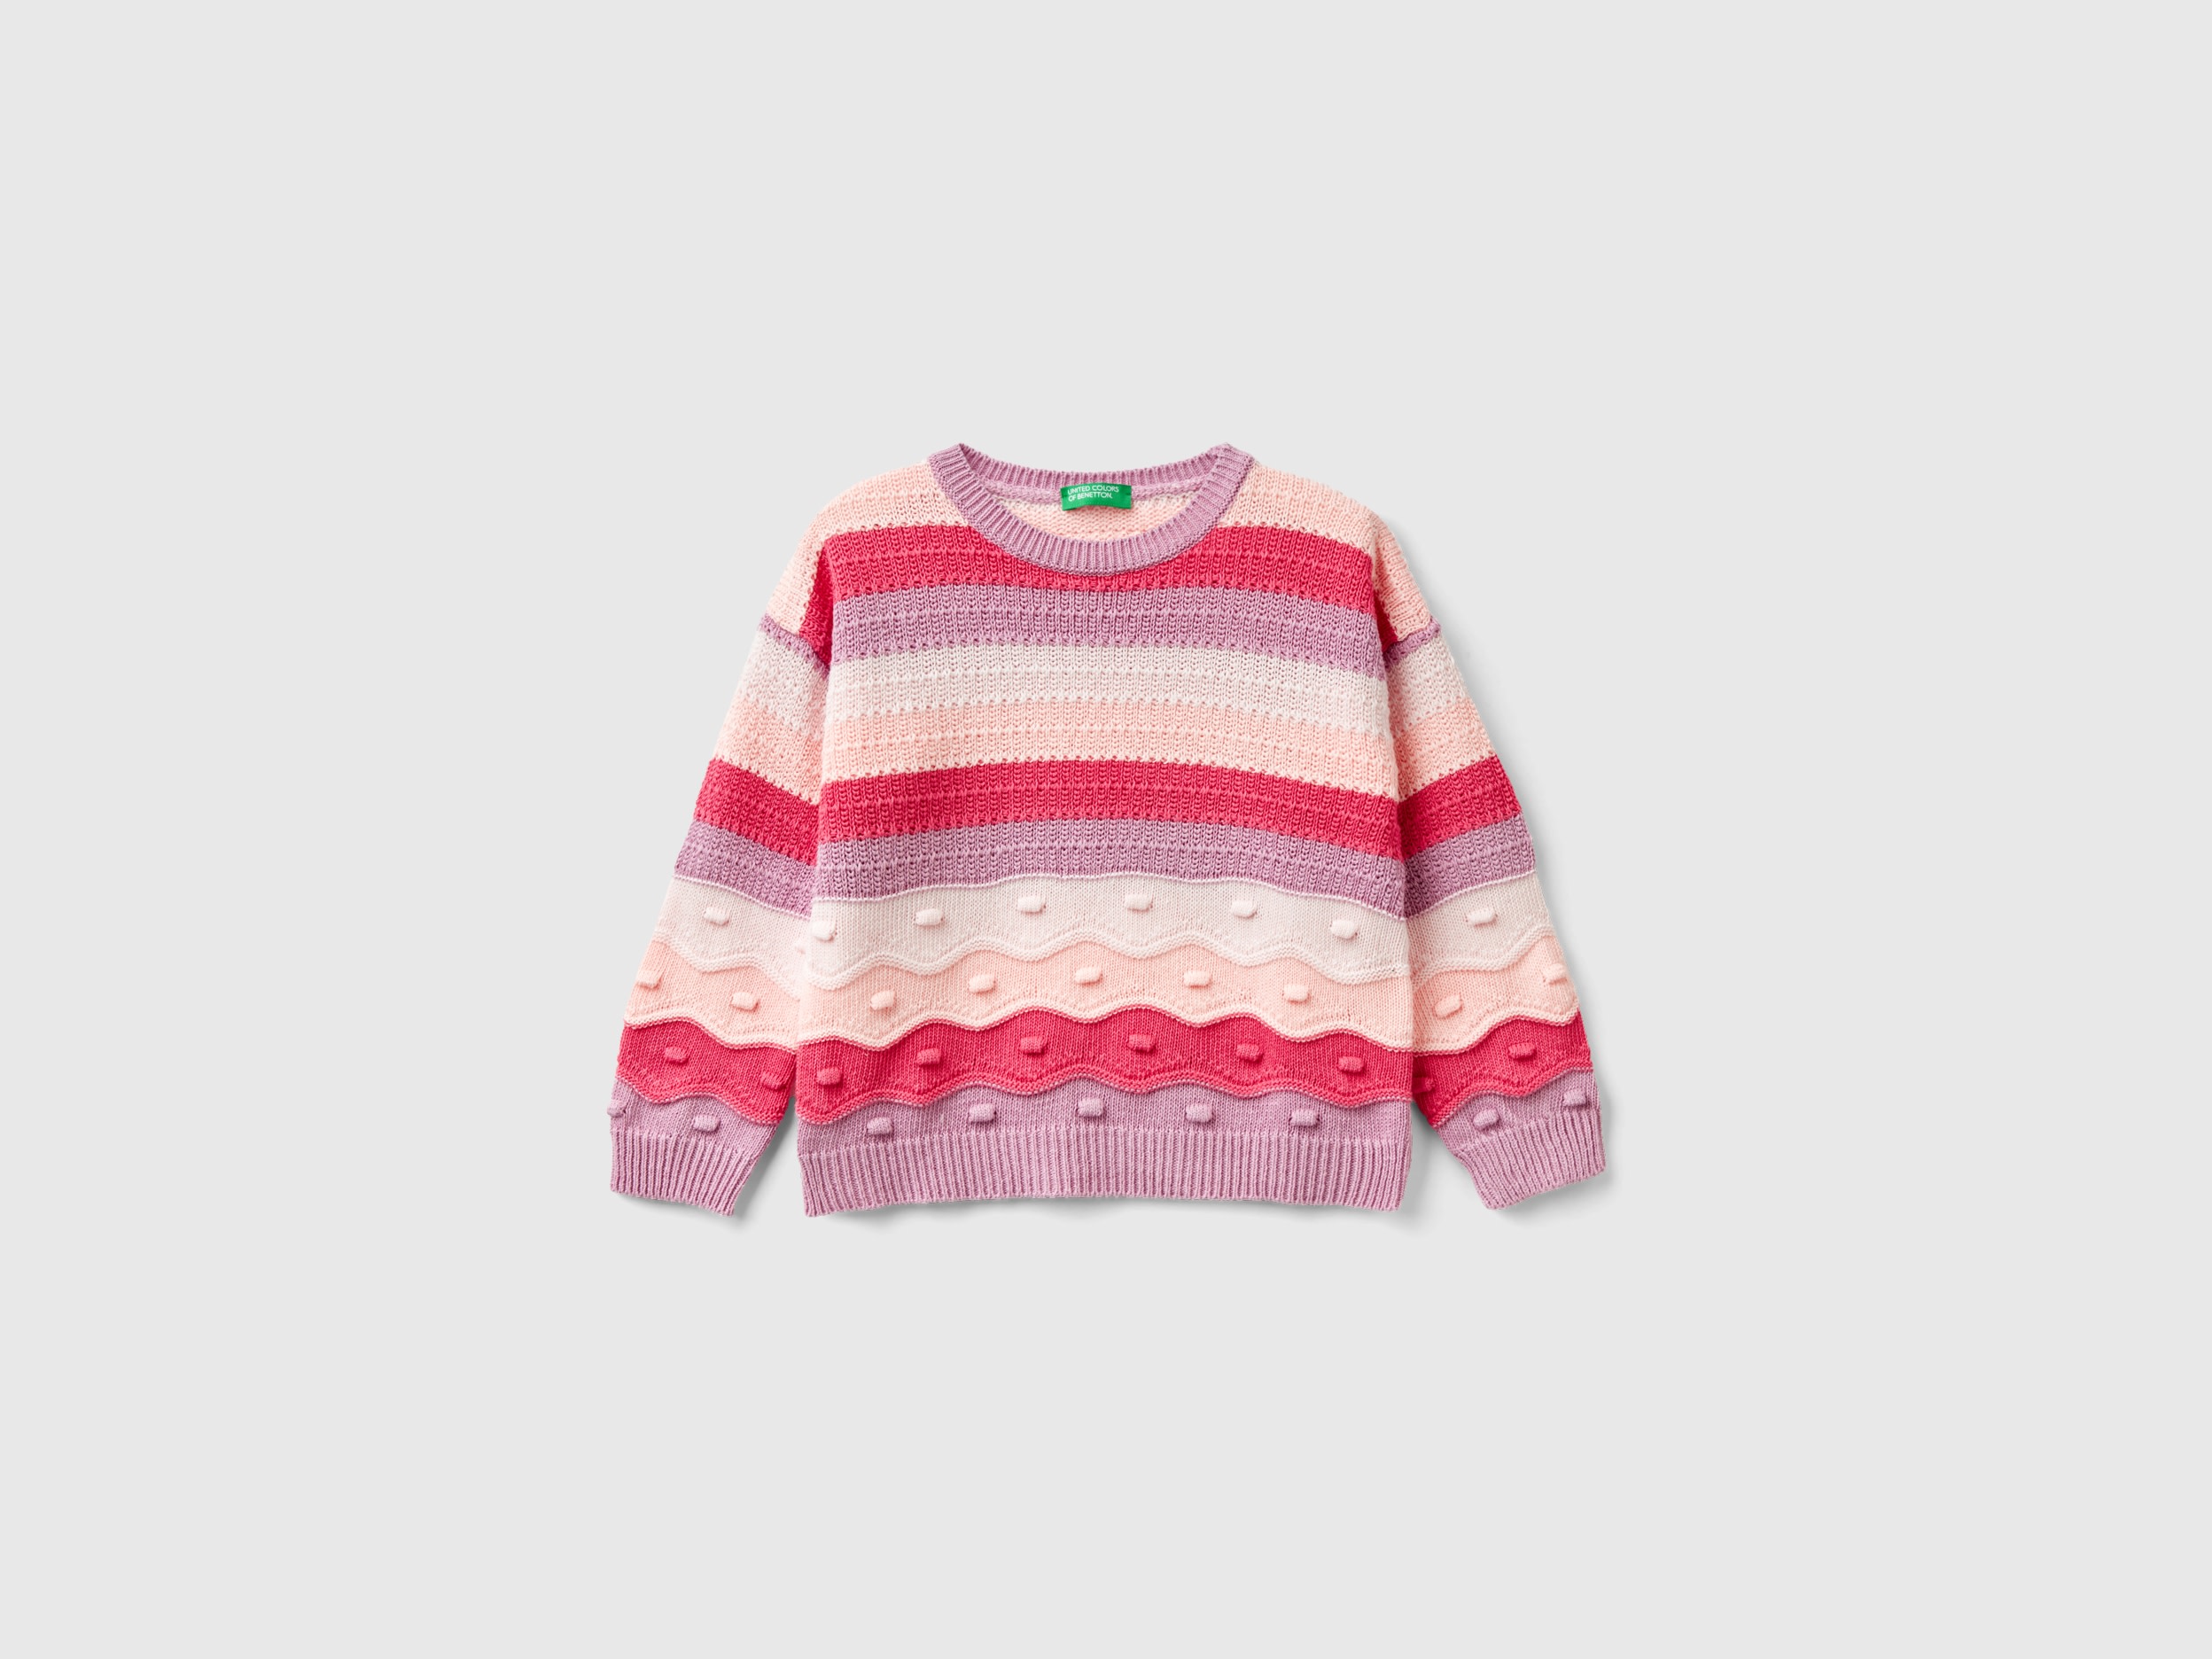 Image of Benetton, Striped Sweater In Recycled Cotton Blend, size 116, Multi-color, Kids